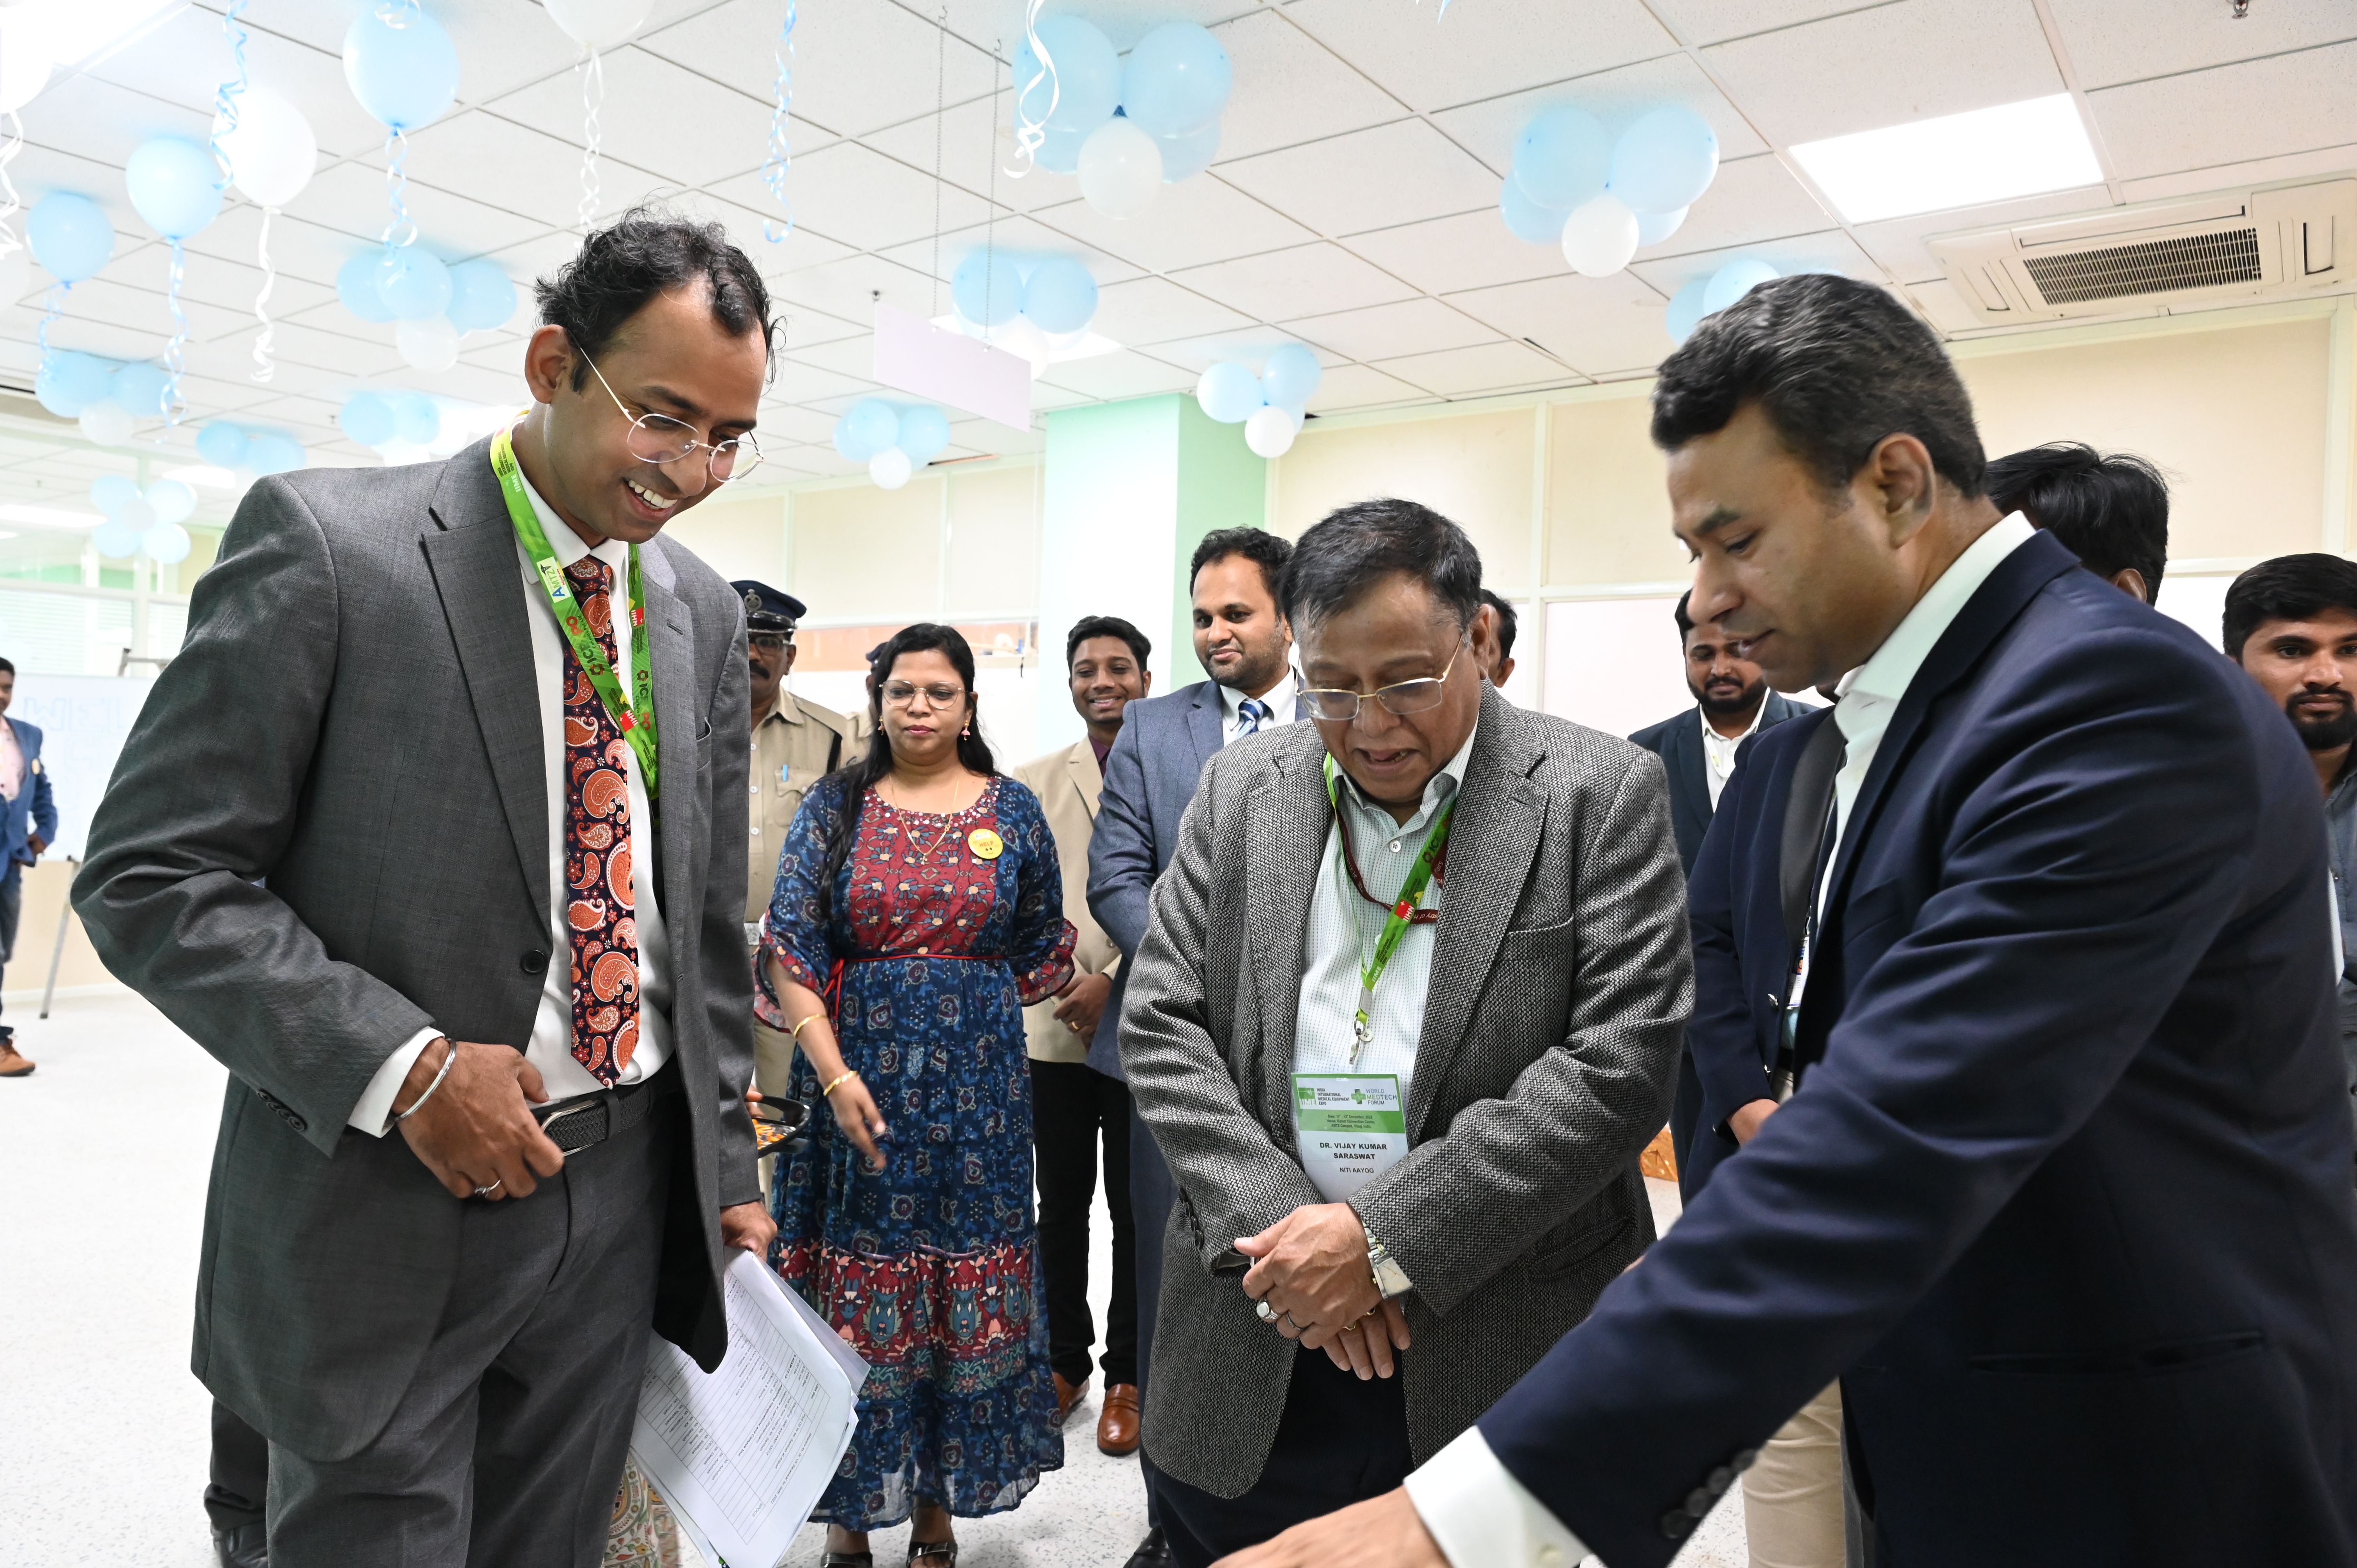 Dr. V.K. Saraswat, a Member of NITI Aayog, Government of India, collaborates with Dr. Jitendra Sharma of AMTZ to advance medical and healthcare technology in India